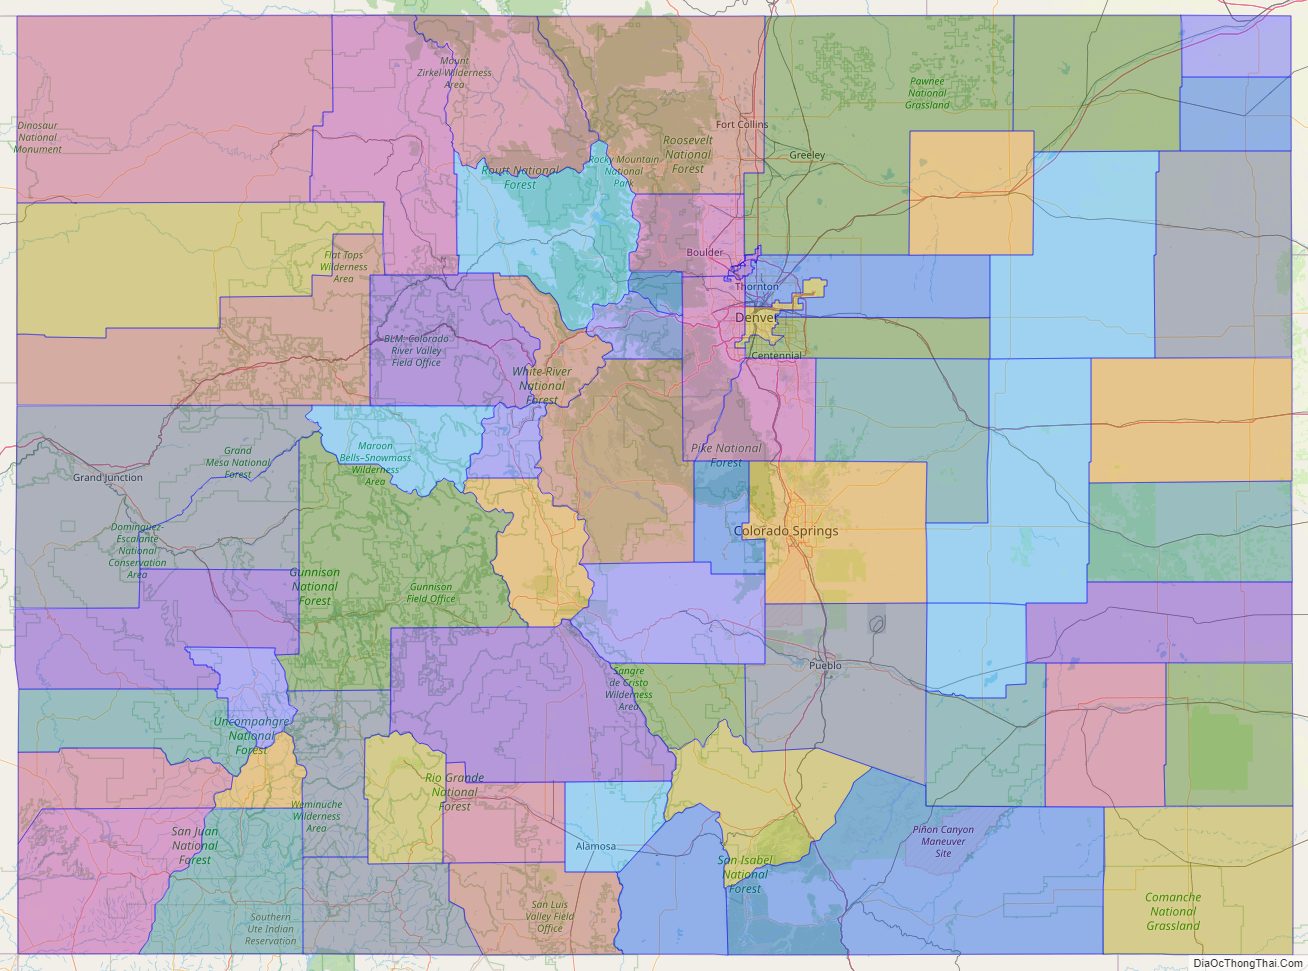 Printable - Large Scale Political Map of Colorado